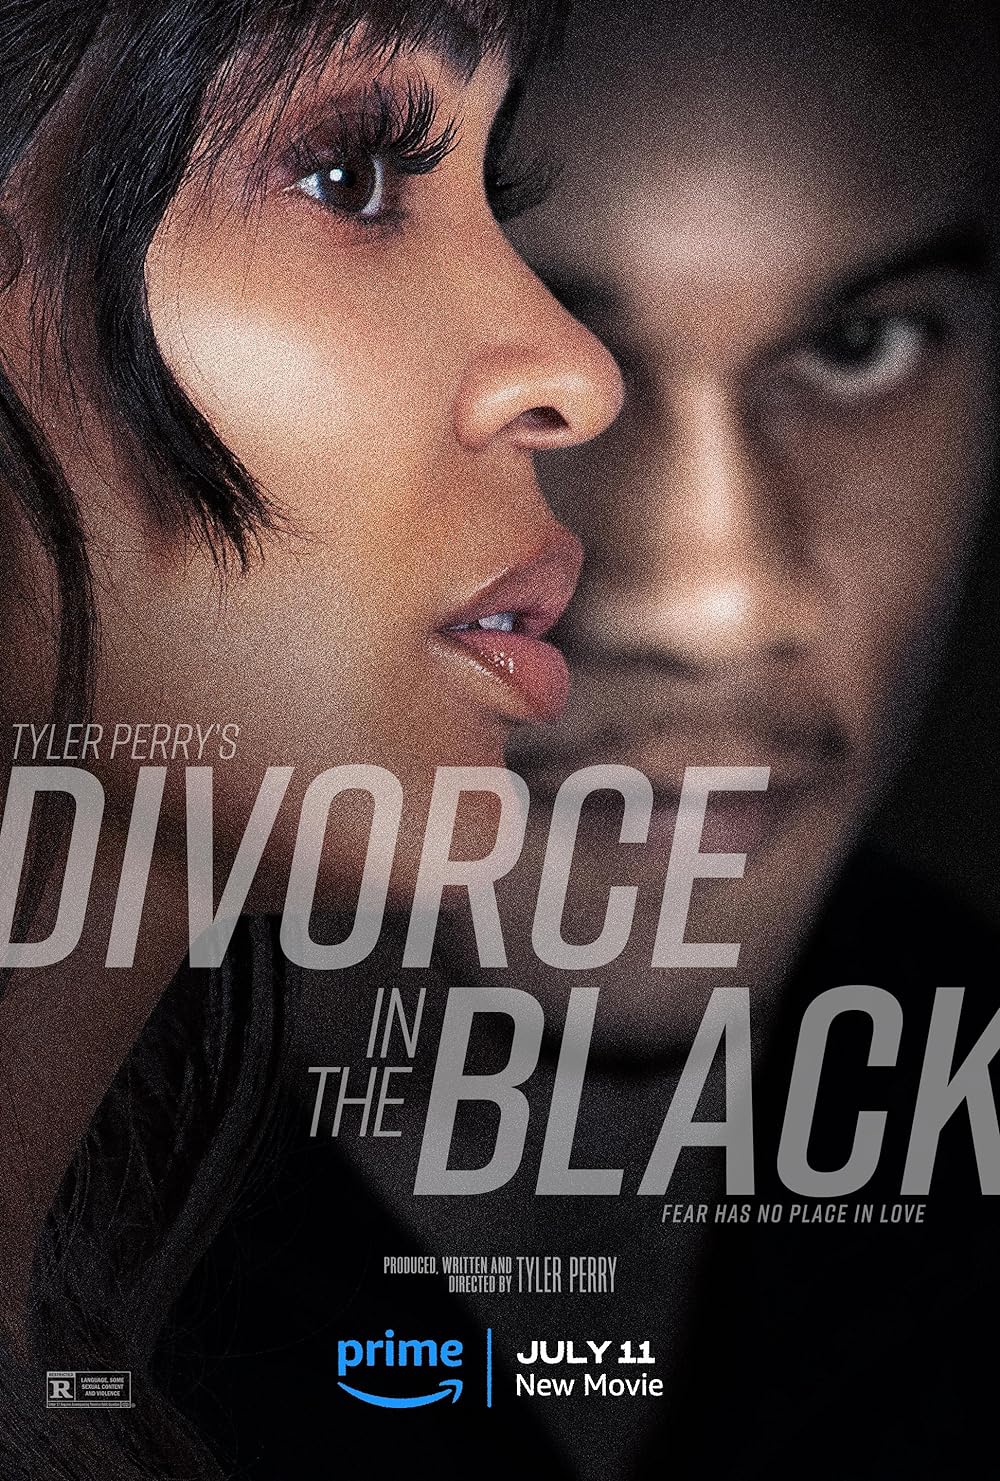 Download Tyler Perry’s Divorce in the Black – Prime Video (2024) WEB-DL Dual Audio Hindi ORG 1080p | 720p | 480p [440MB] download